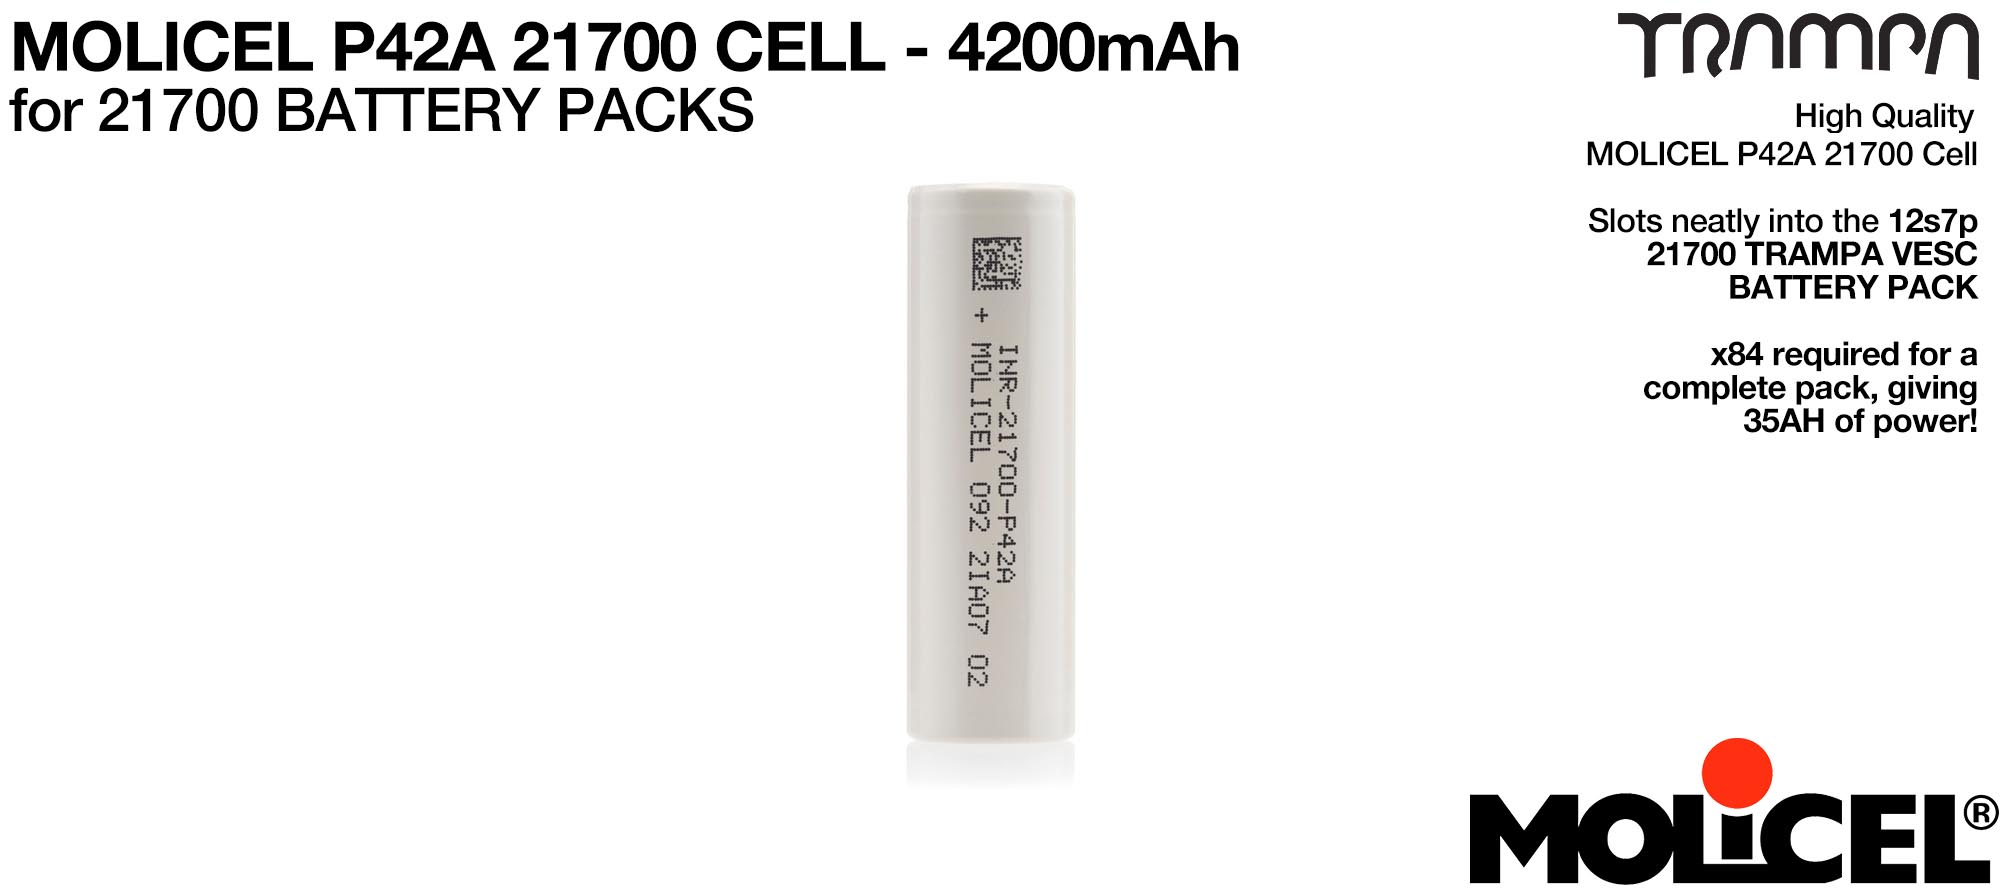 21700 Cells - MOLICEL P42A 4200mAh   - UK CUSTOMERS ONLY 